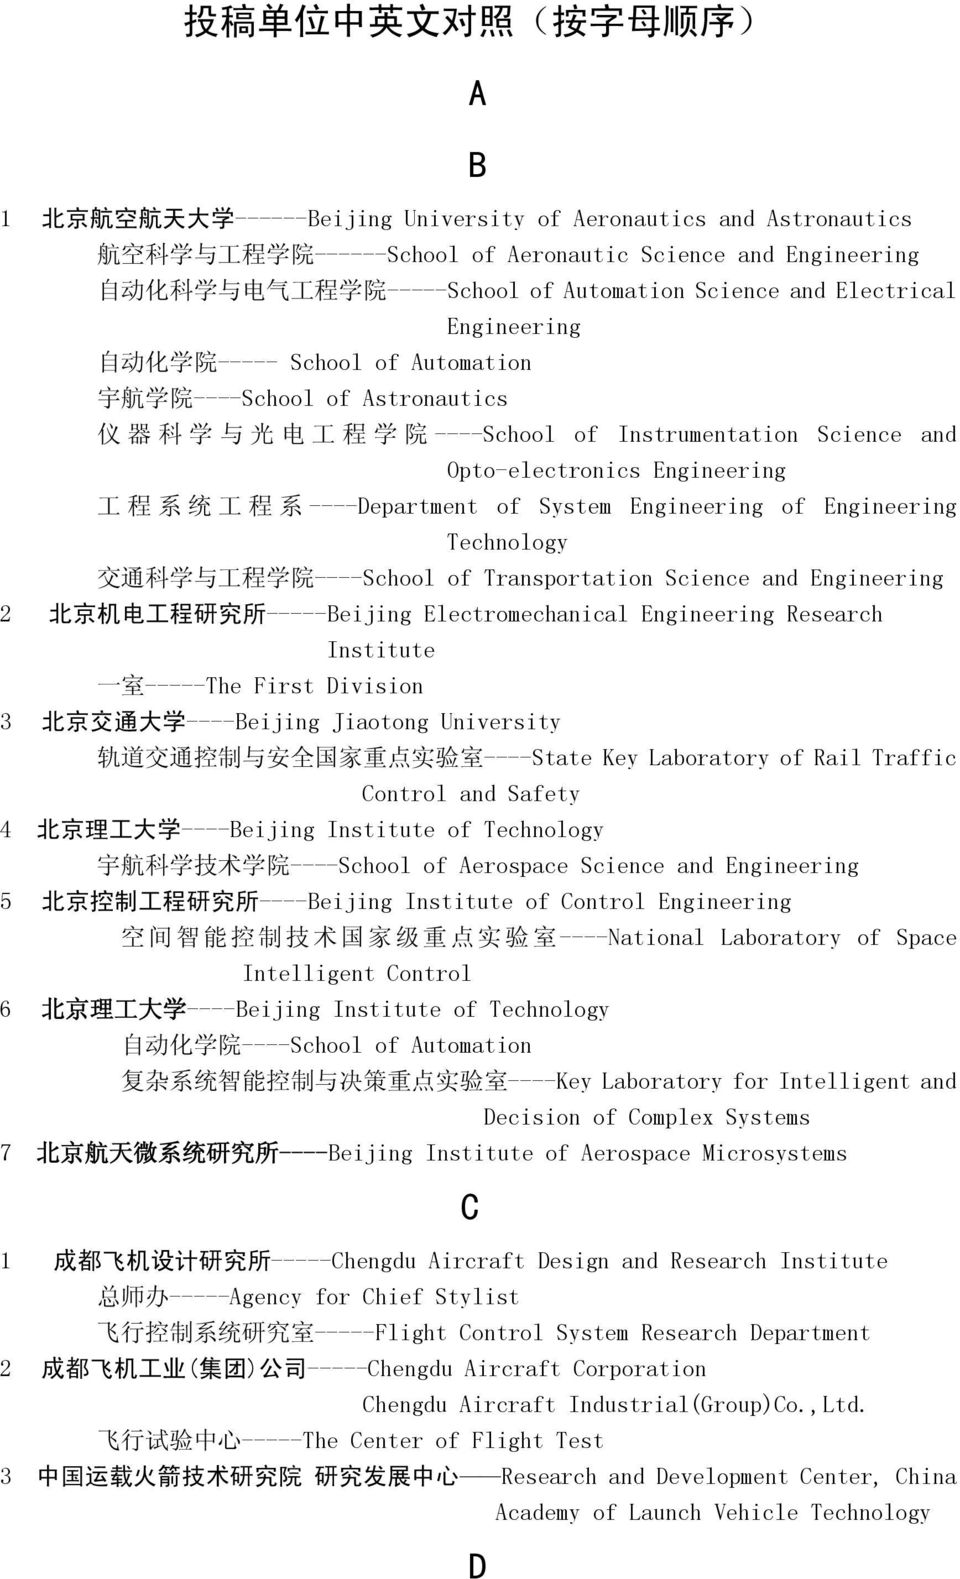 and Opto-electronics Engineering 工 程 系 统 工 程 系 ----Department of System Engineering of Engineering Technology 交 通 科 学 与 工 程 学 院 ----School of Transportation Science and Engineering 2 北 京 机 电 工 程 研 究